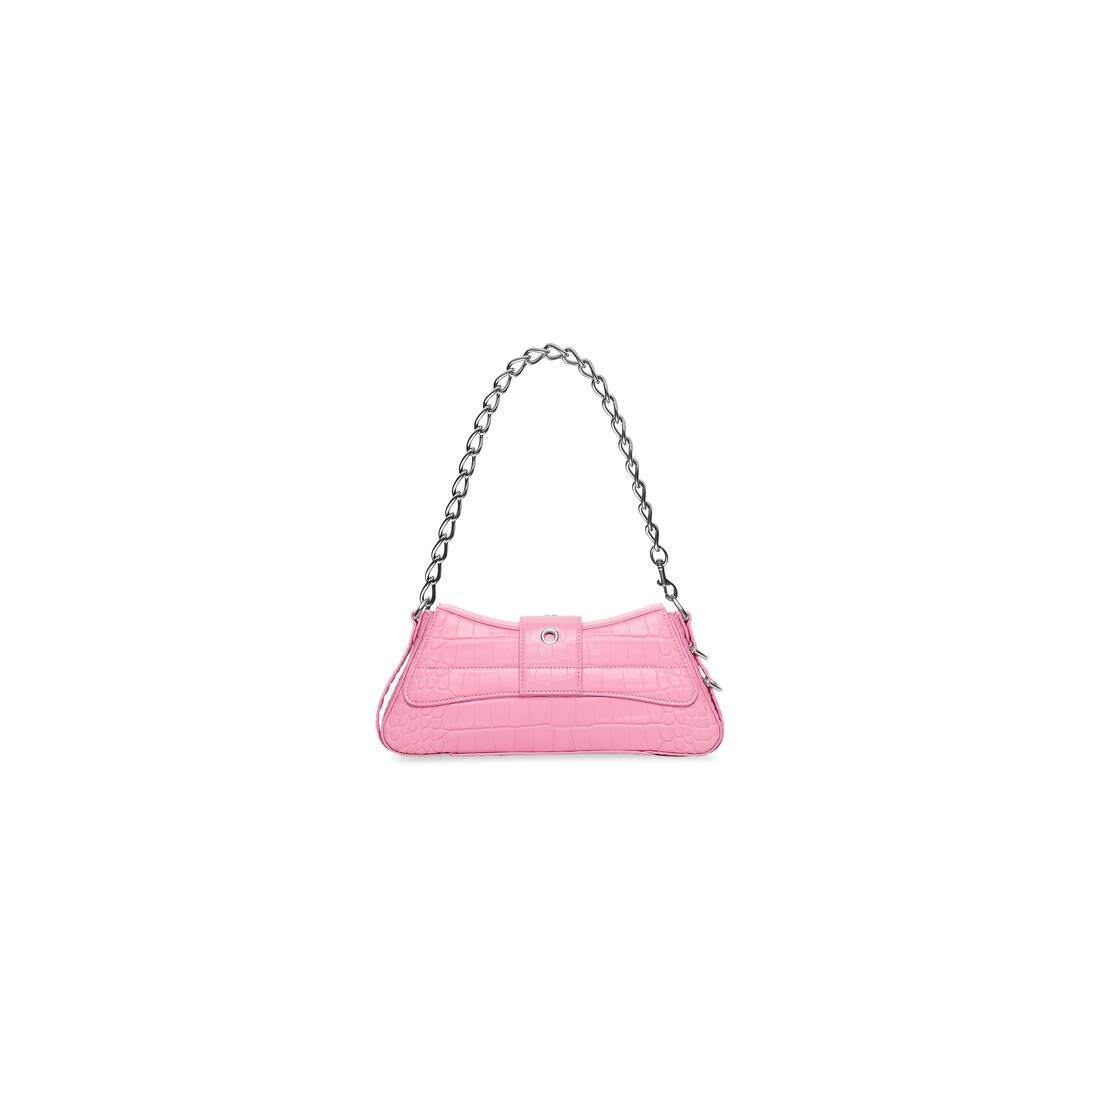 Guess bag in light pink with embossing